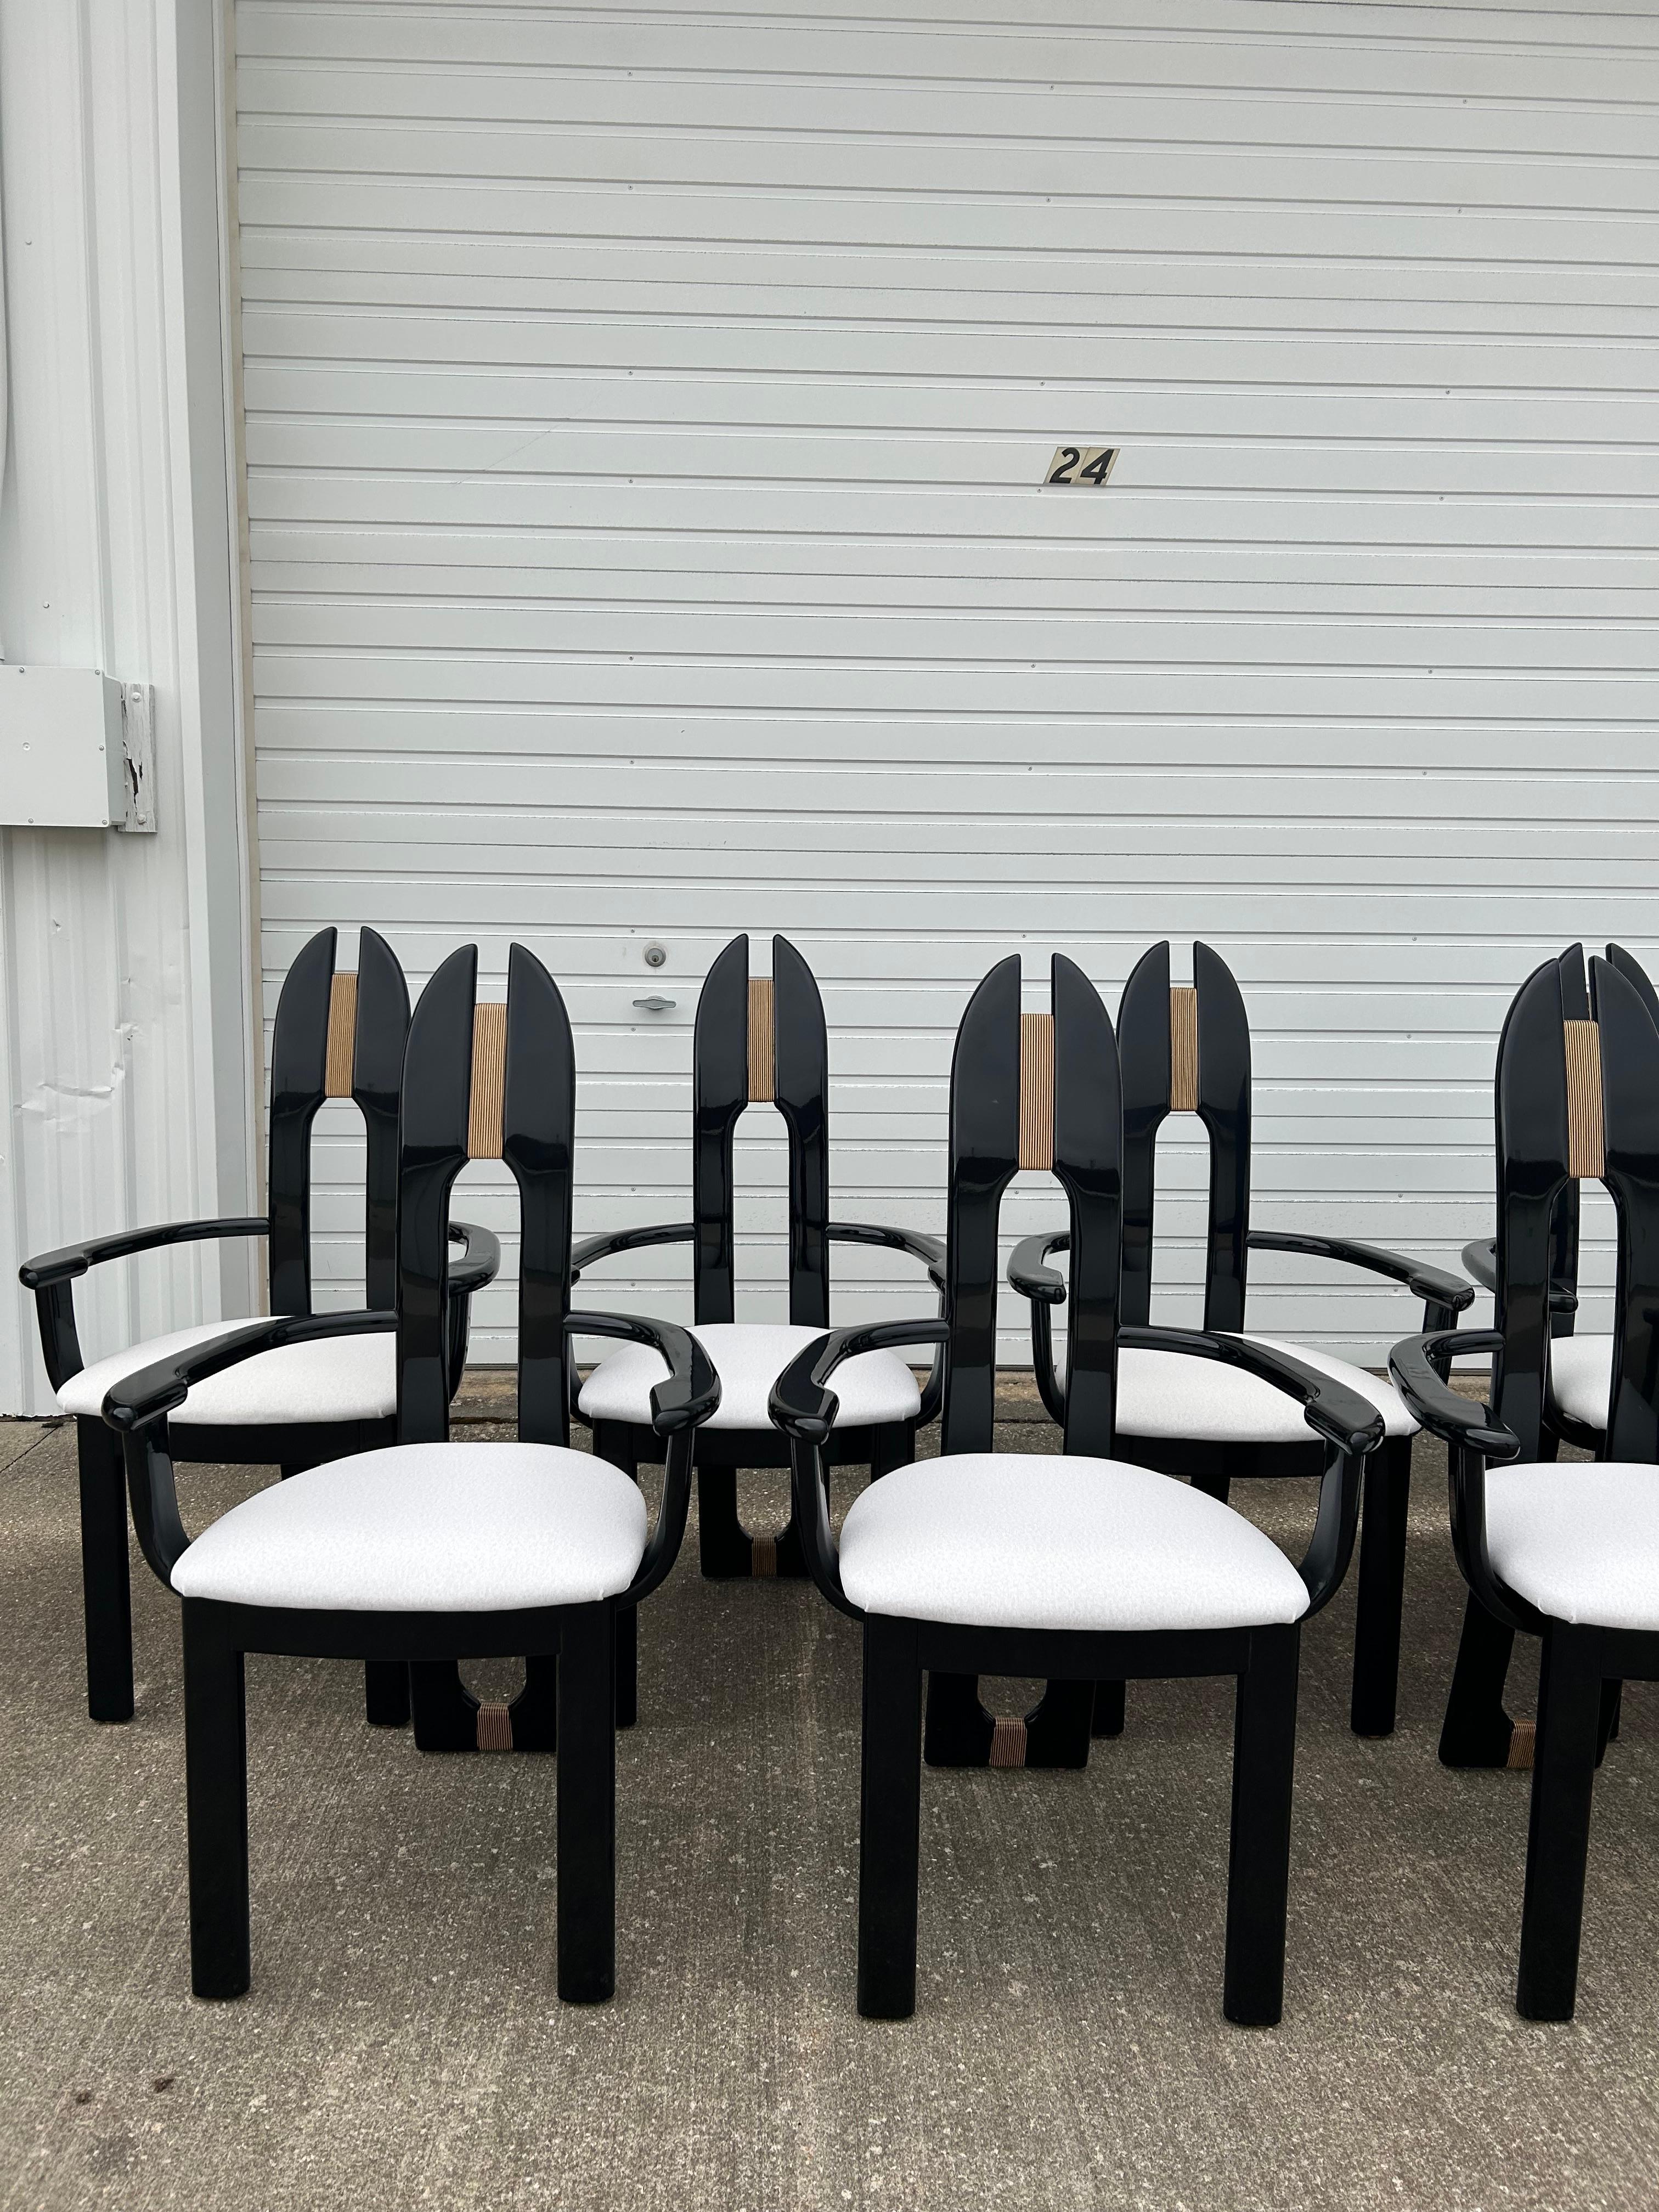 Set of 10 Italian Avant Garde Dining Armchairs by Pietro Costantini. These chairs are reupholstered in JF Fabrics “Woolish” fabric. It is a soft velvet with a faux wool look, finished with a FibreGaurd stain free technology. The beach wood frames